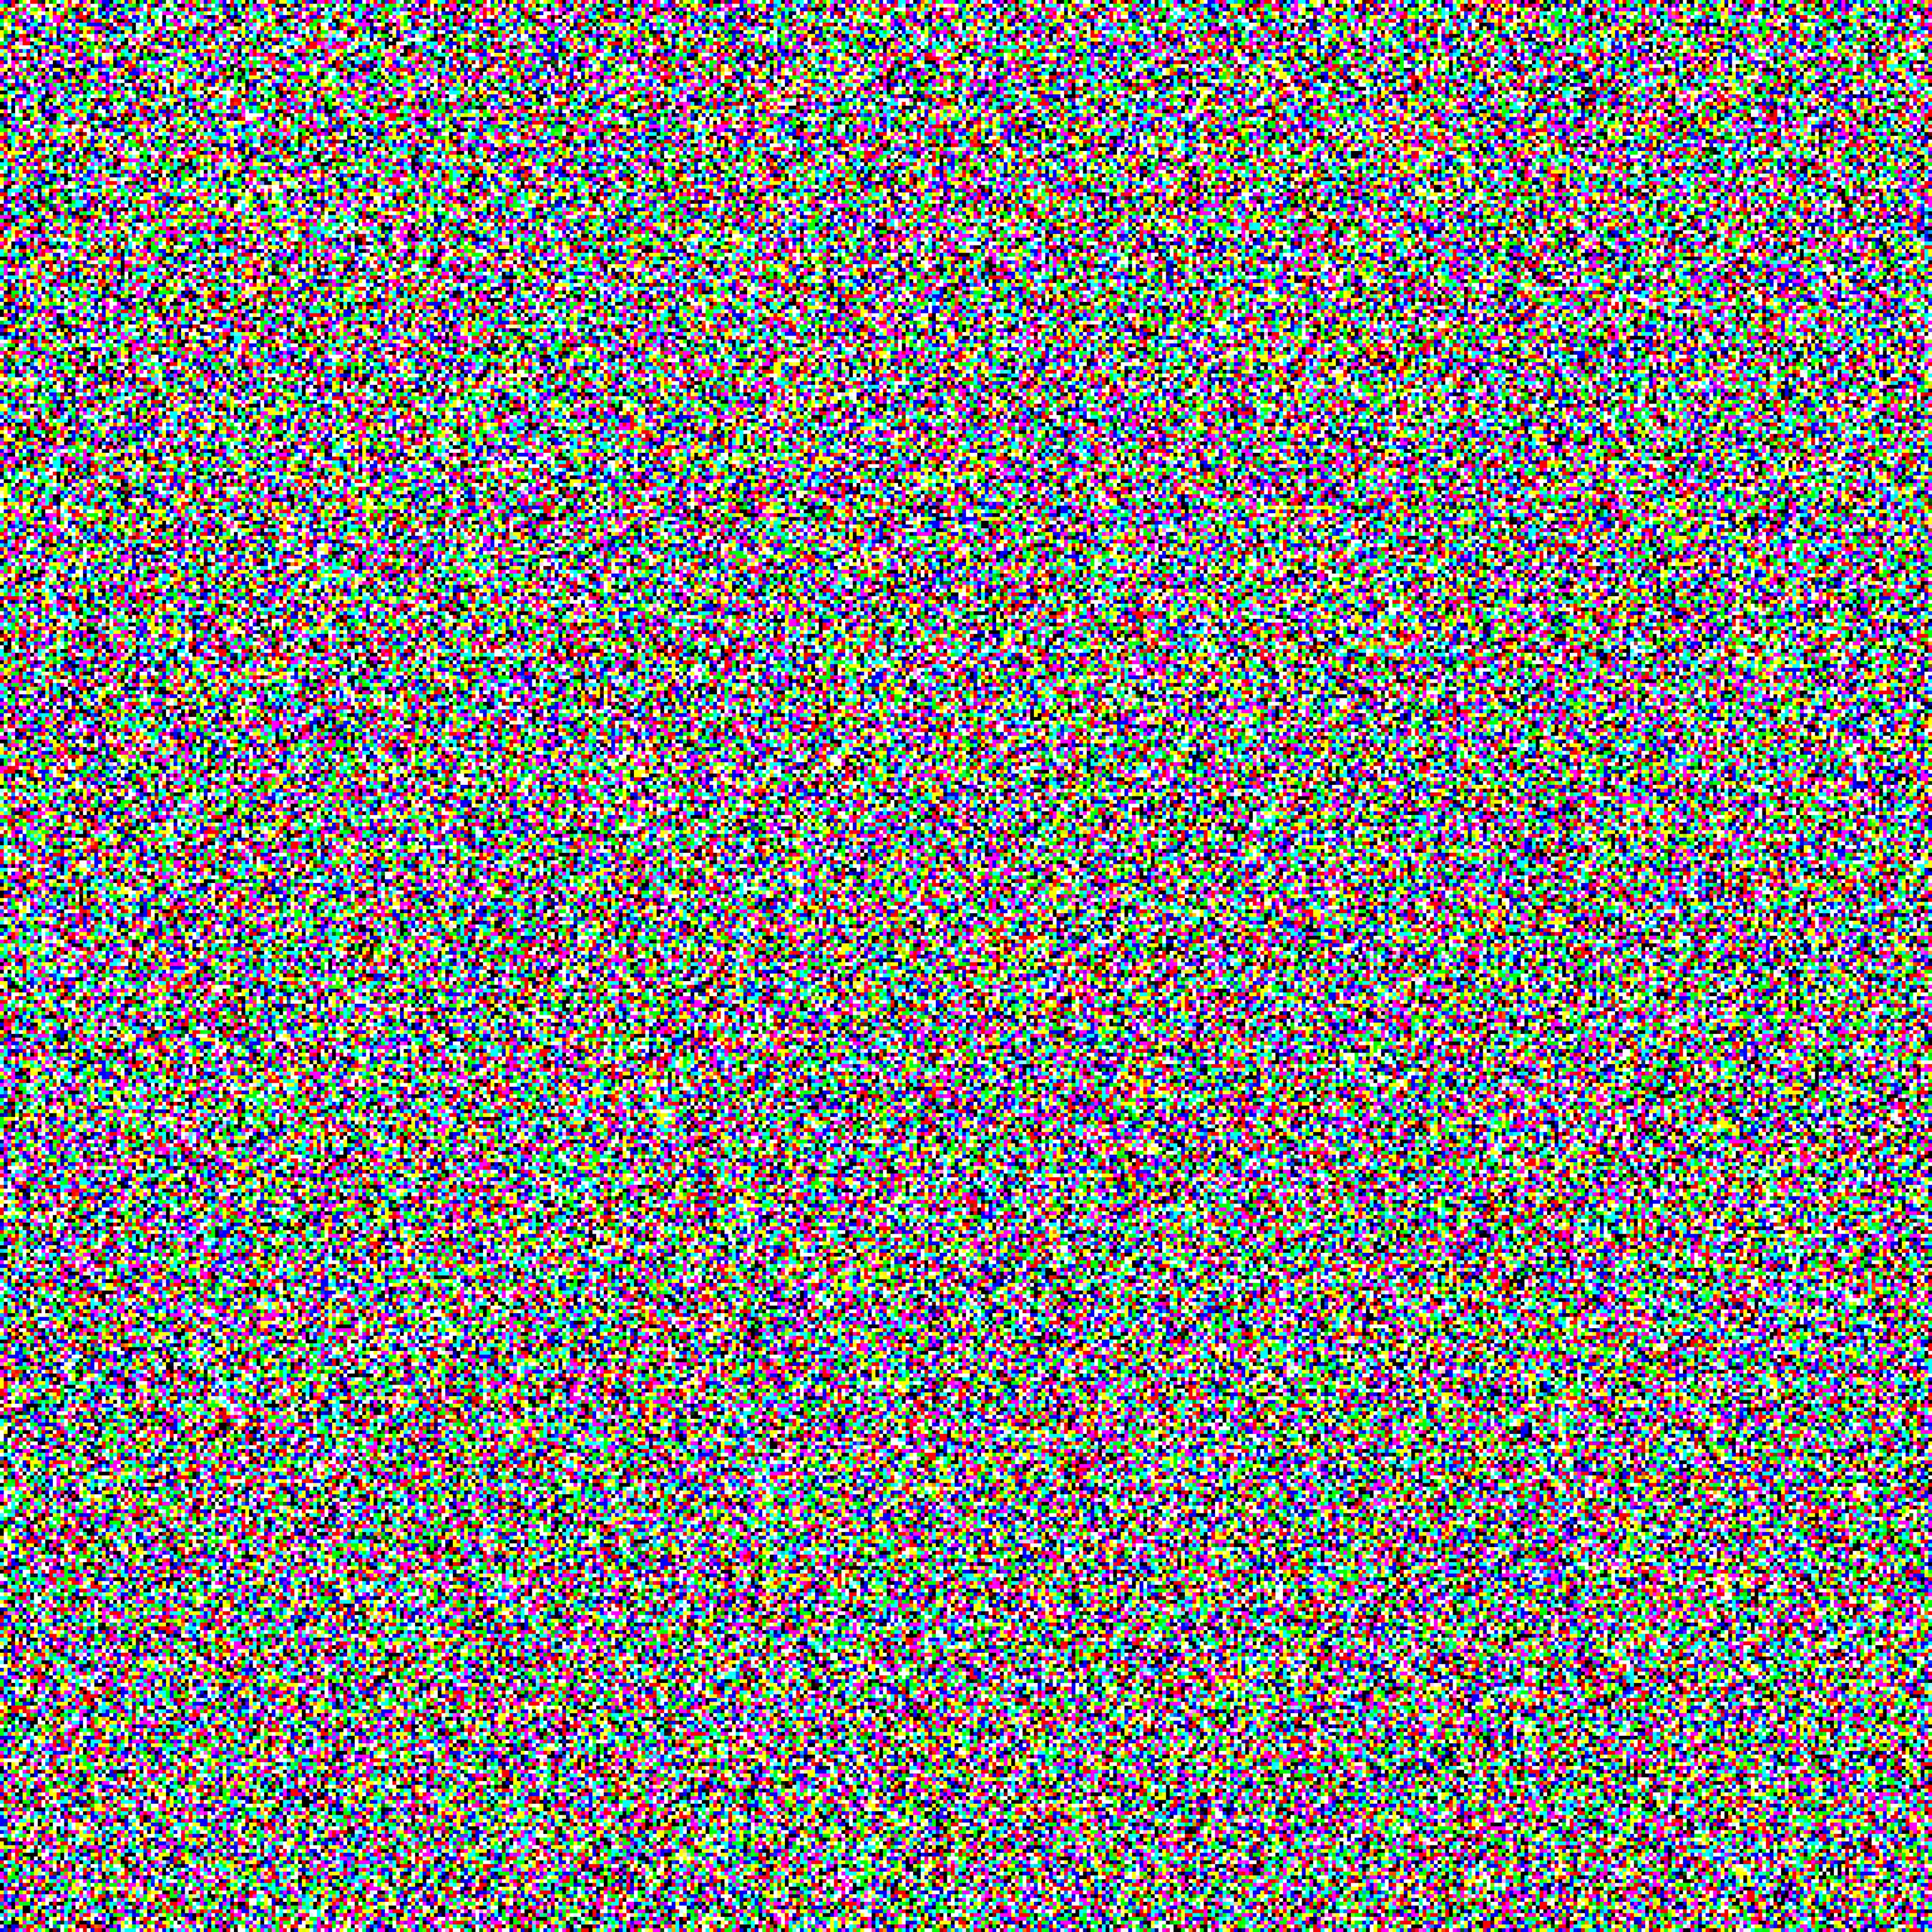 A cluster of coloured pixels made up from random gaussian noise taking up the whole canvas, representing a not denoised AI generated image; digital pointillism